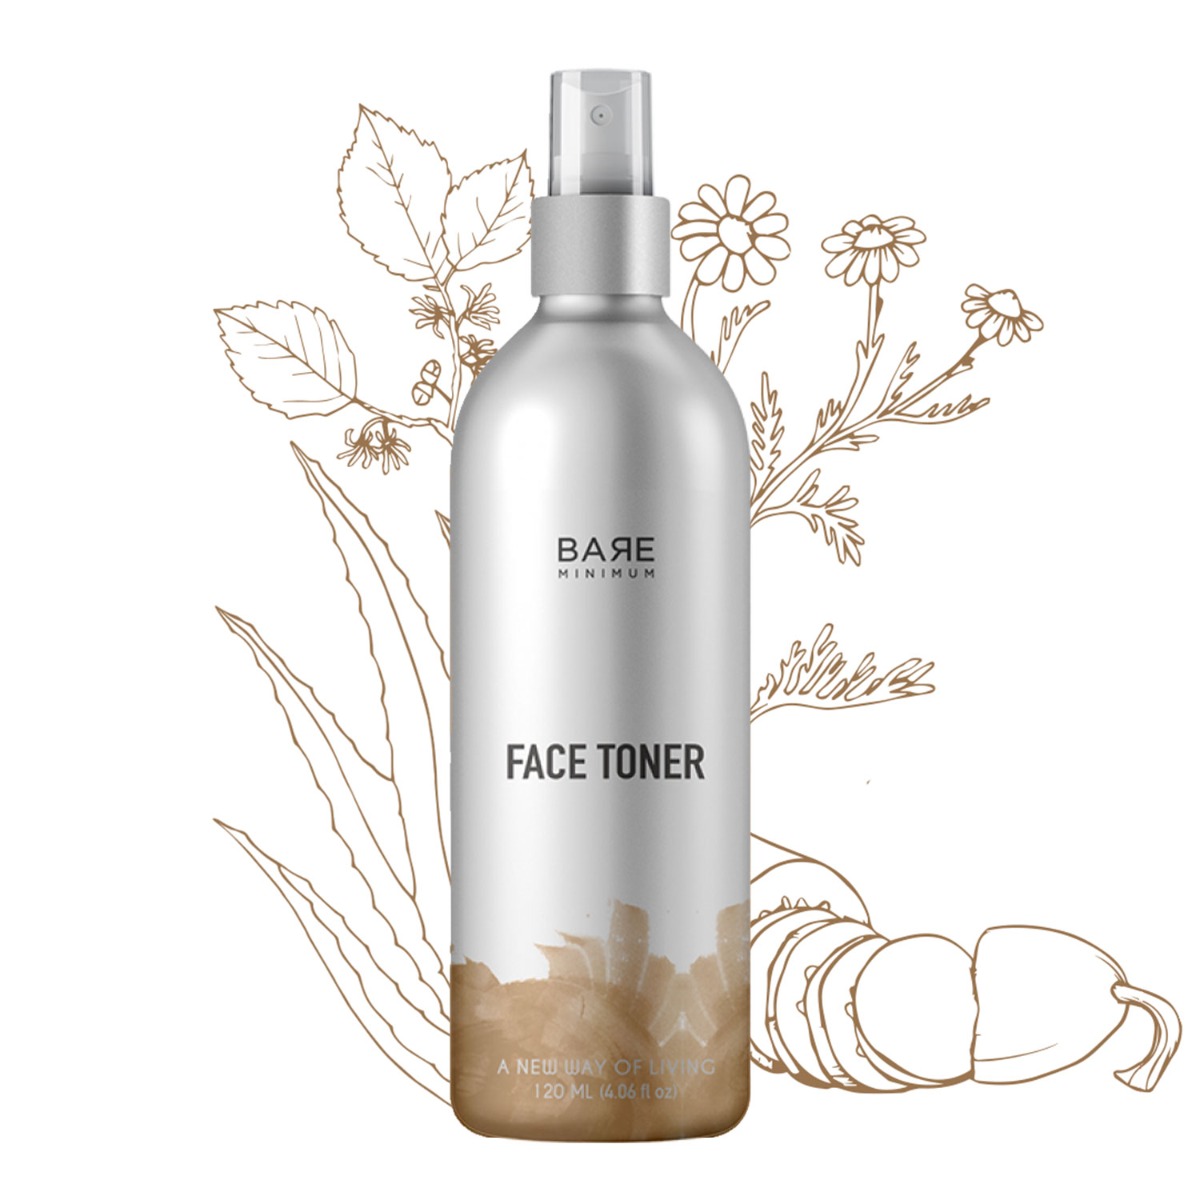 Bare Minimum Natural Cucumber Face Toner 120 ml for All-Skin Type, Even-Tone and Pore-Closing